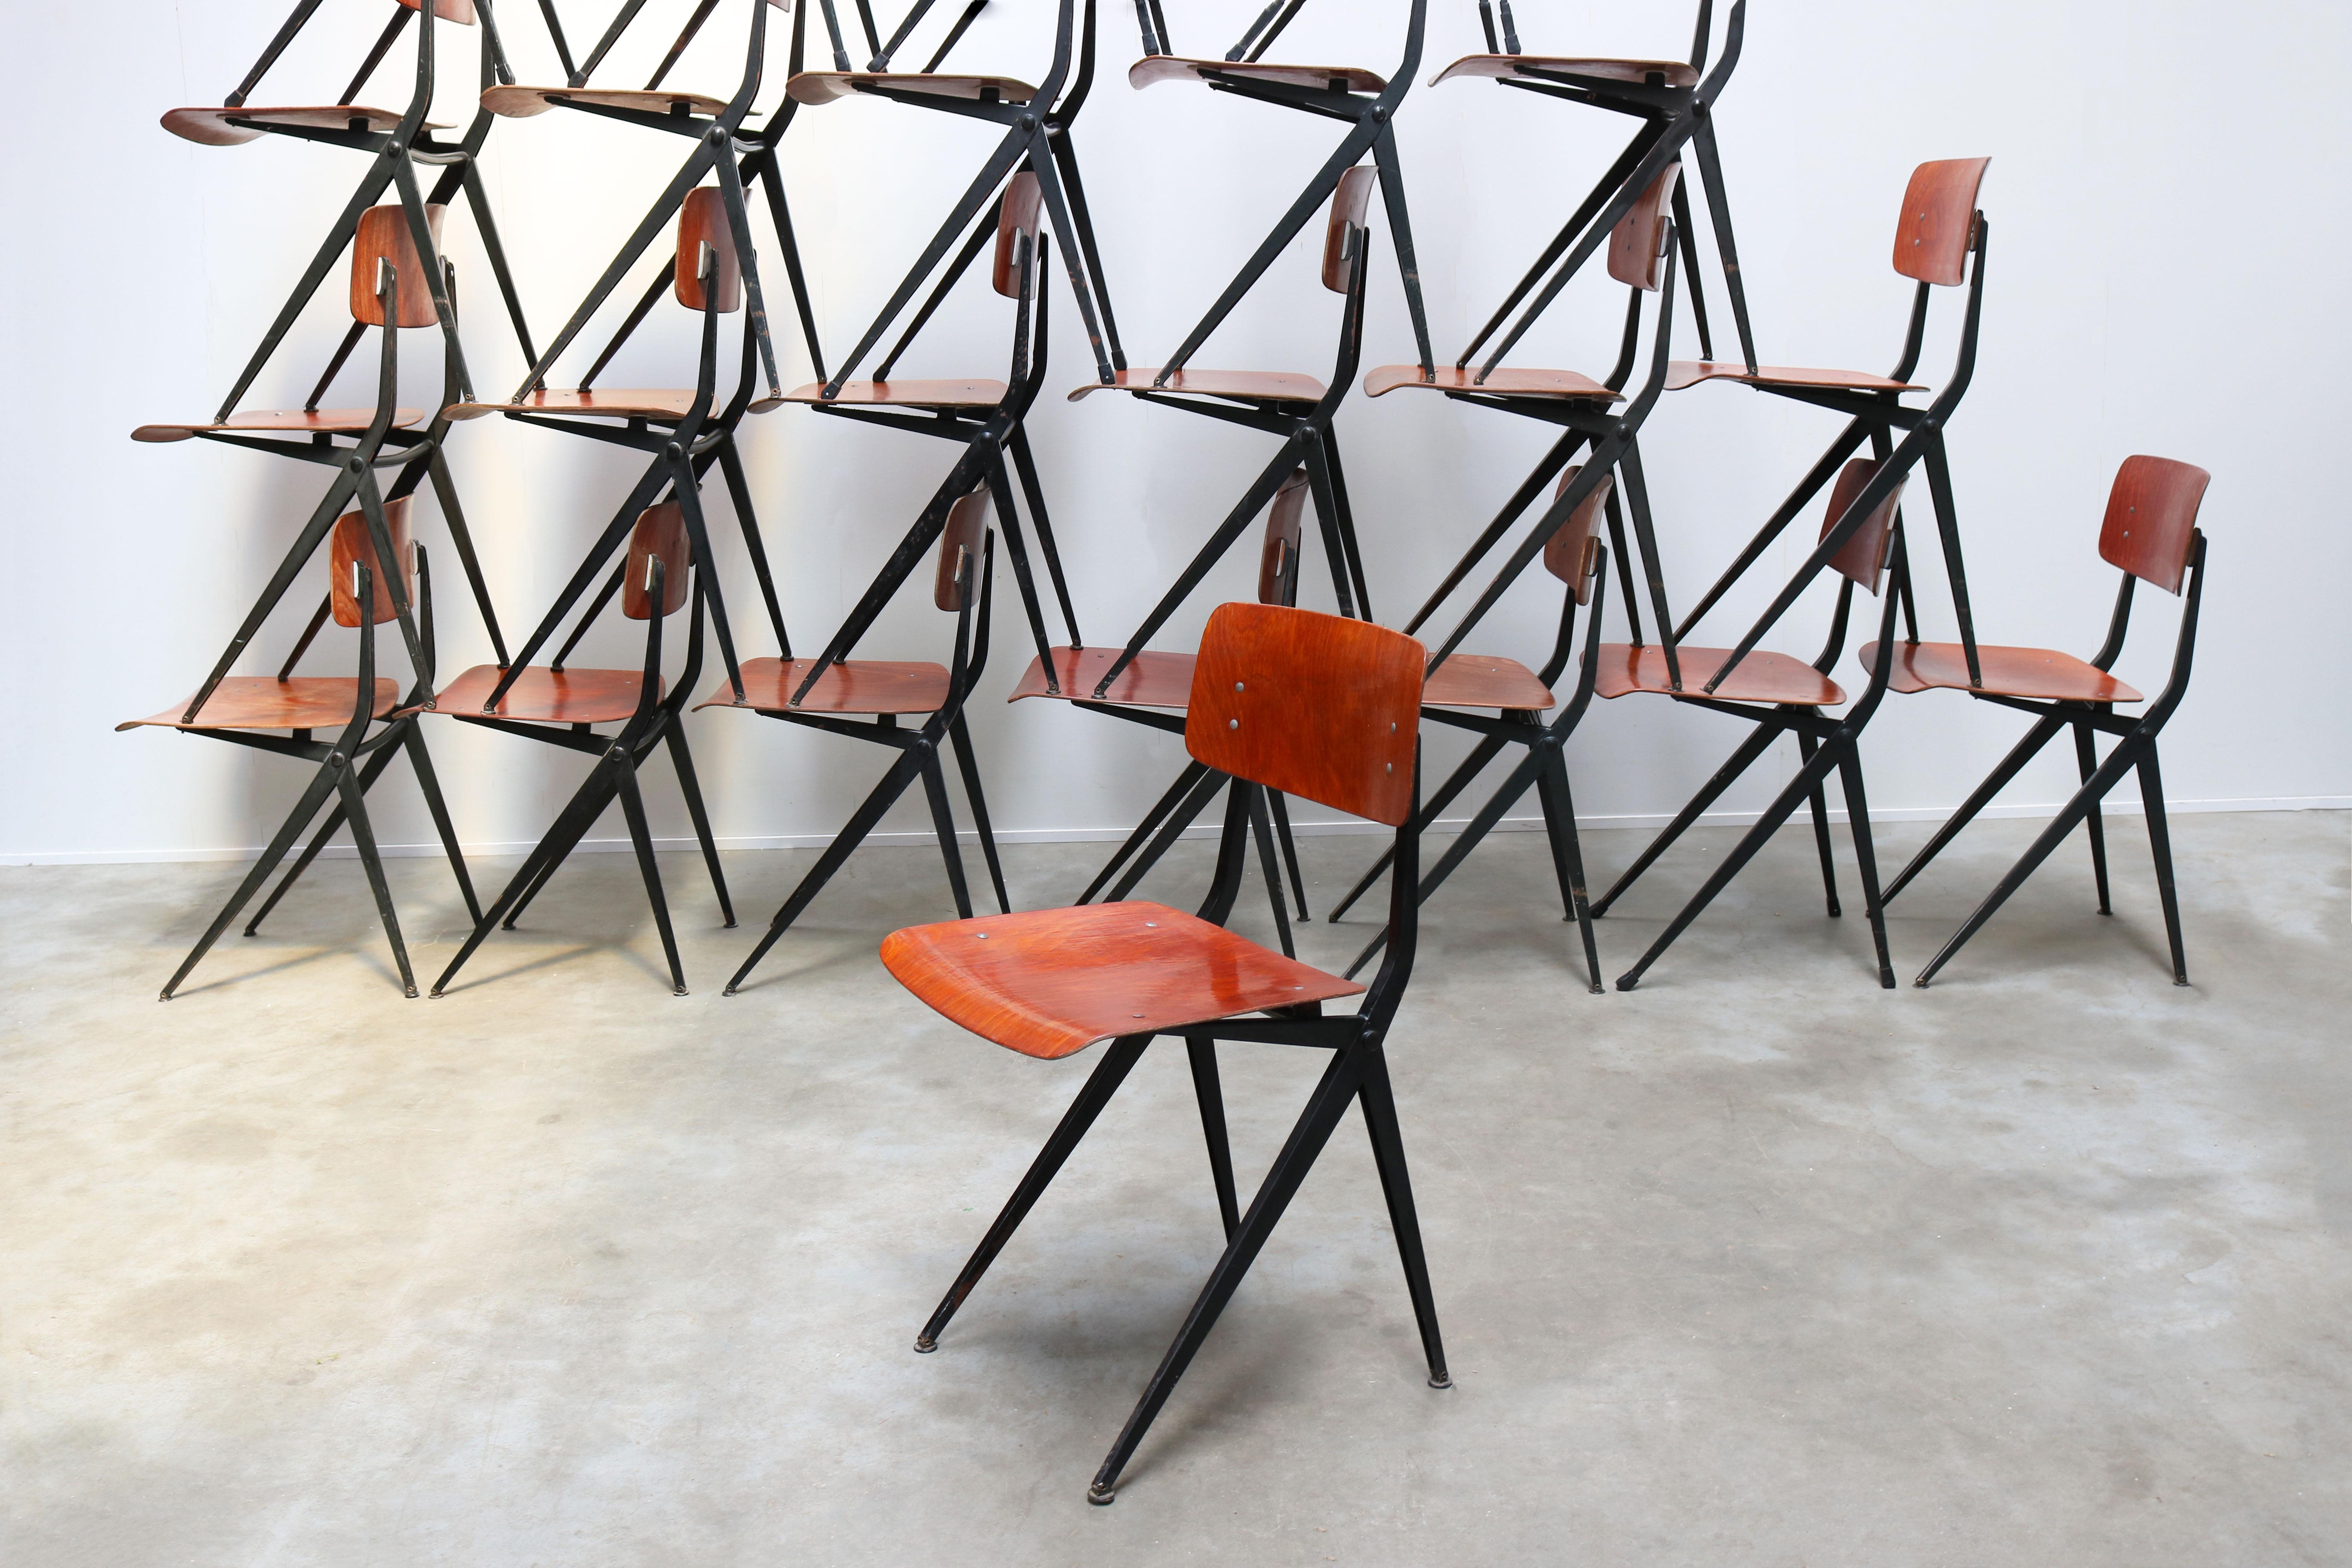 Very large set of 32 Marko Friso Kramer Dutch Design Compass chairs.
The steel frame has the elegant compass shape with a strong connection to the revolutionary Industrial style of designs by Jean Prouvé and Gerrit Rietveld & Friso Kramer. 
This